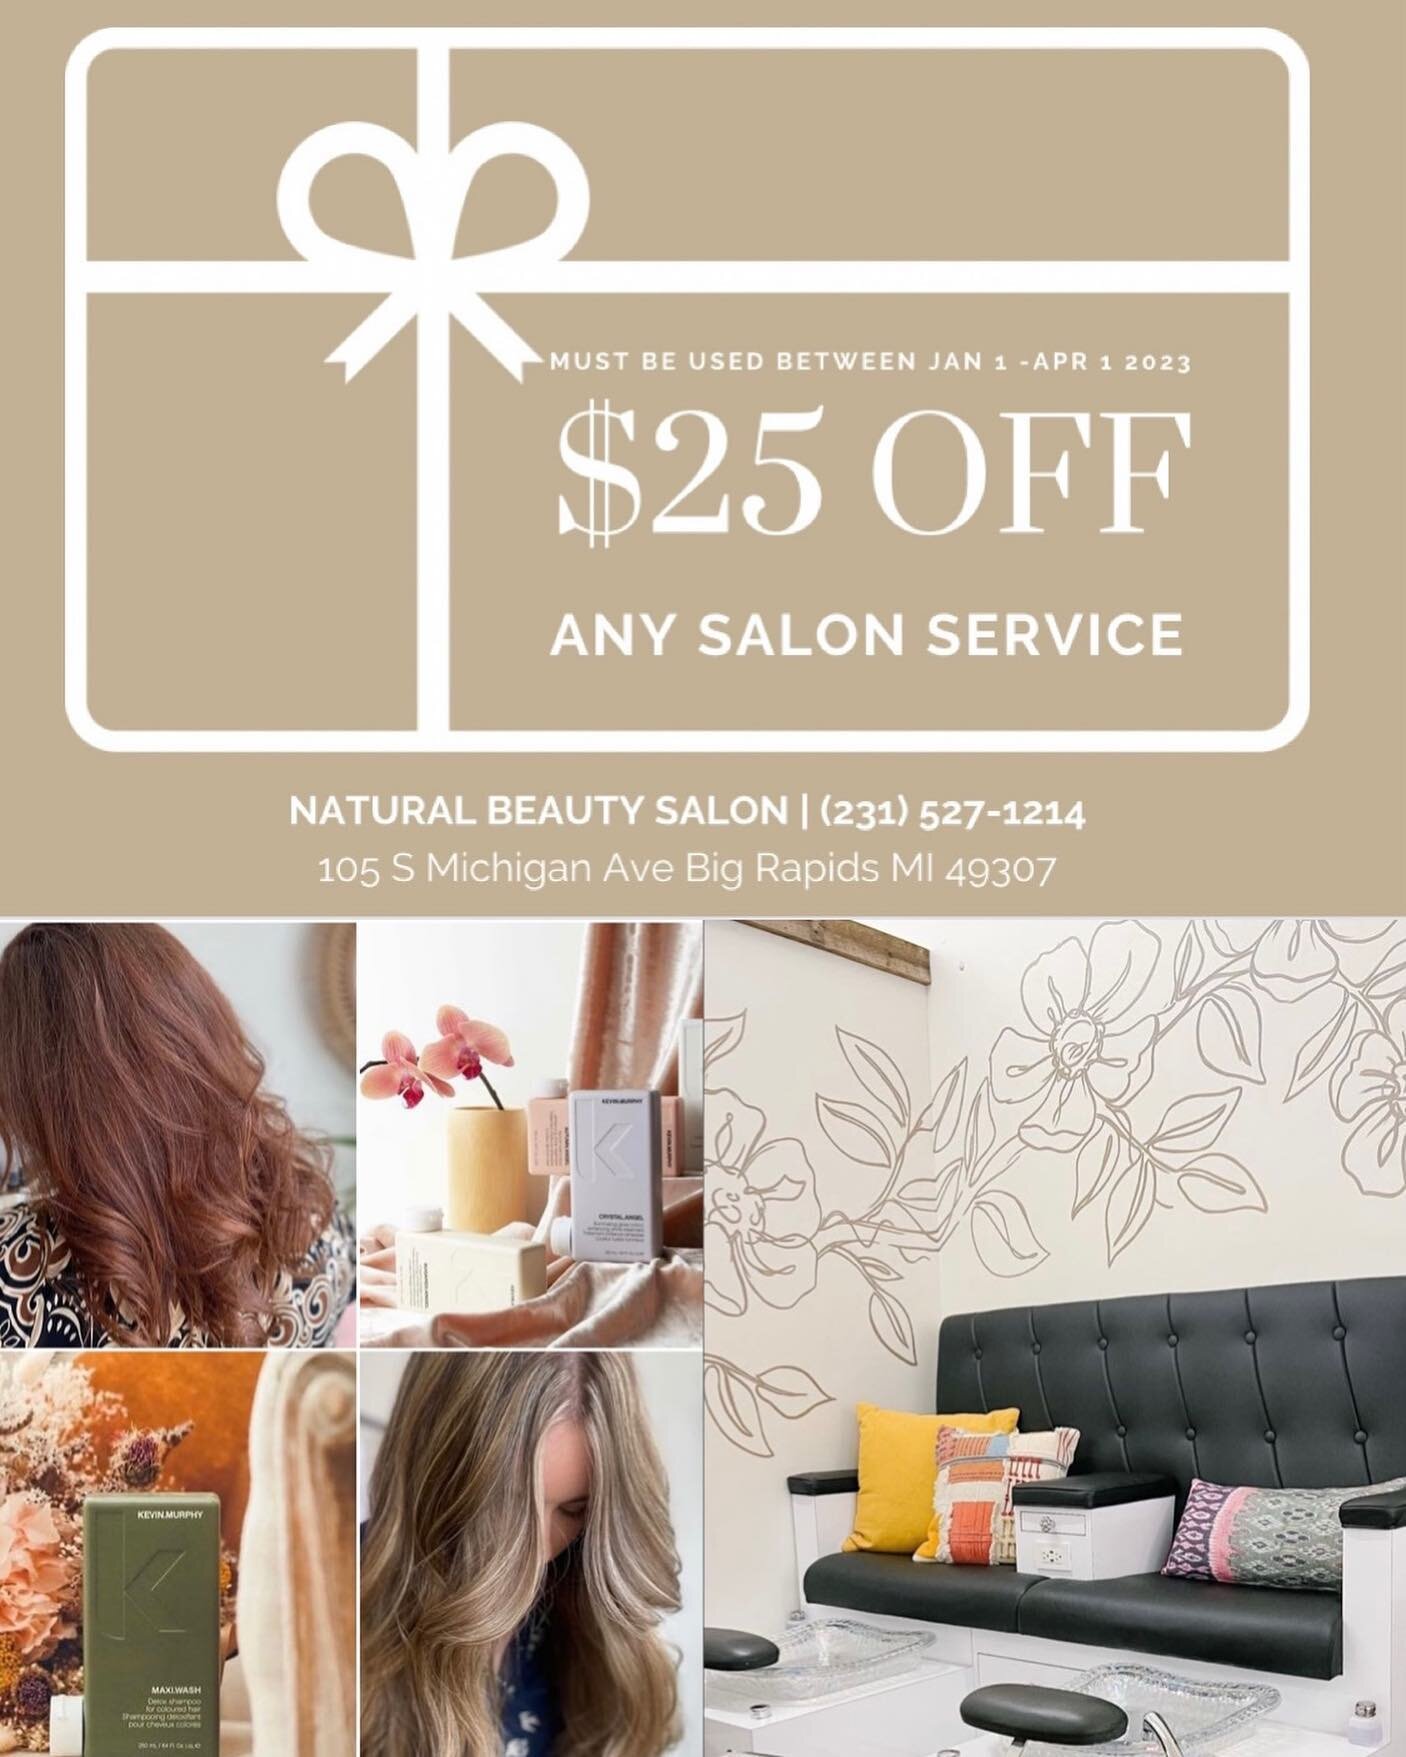 ✨BLACK FRIDAY SPECIAL✨
.
Through December 9th, you will receive a $25 service voucher with a $100 gift card purchase!
.
We are closed for the holiday weekend, but starting Monday you can call or stop in to purchase. We are offering complimentary mail